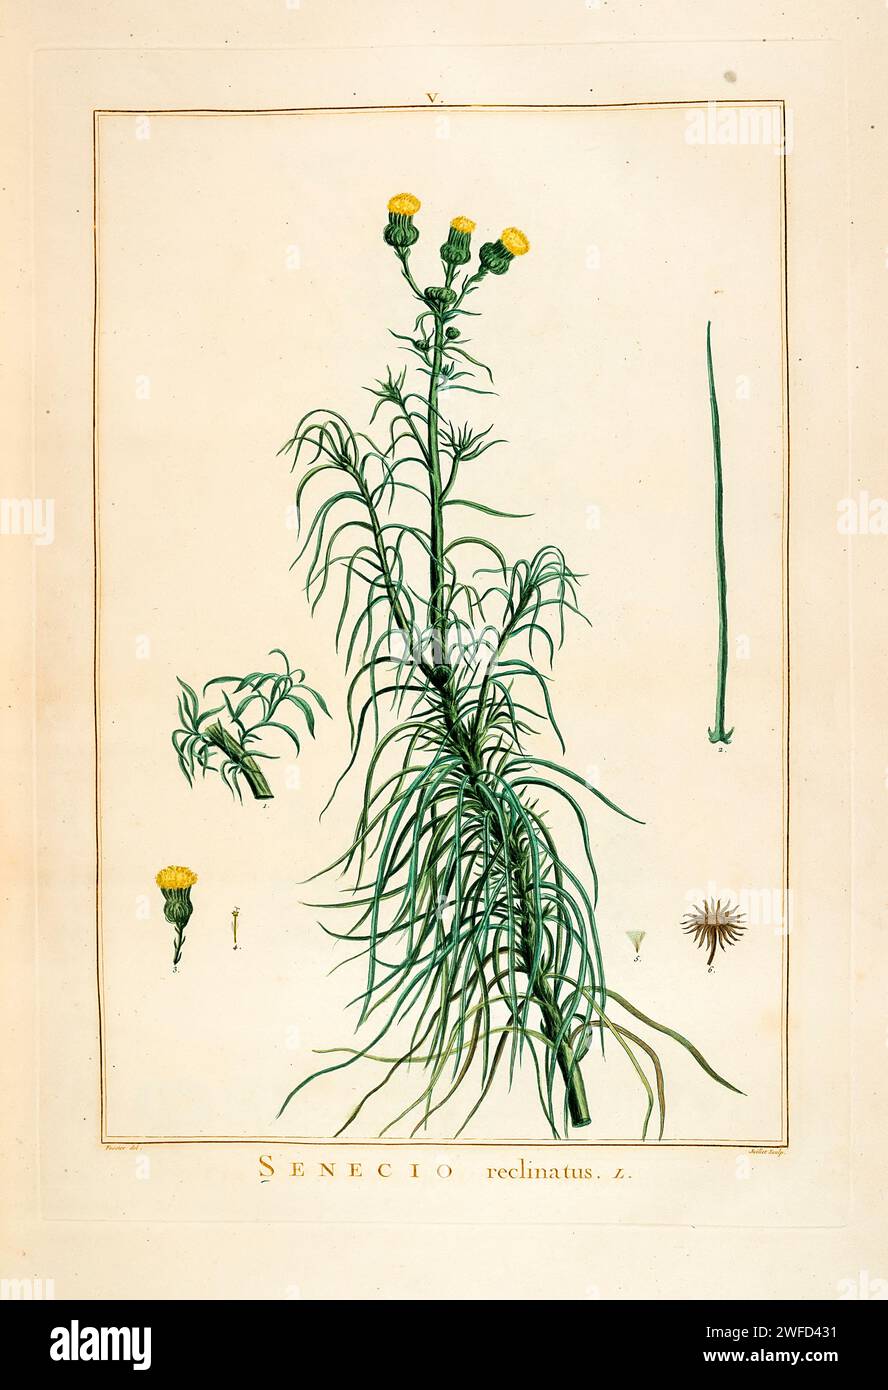 Senecio reclinatus Hand Painted by Pierre-Joseph Redouté in 1784 Senecio is a genus of flowering plants in the daisy family that includes ragworts and groundsels. Variously circumscribed taxonomically, the genus Senecio is one of the largest genera of flowering plants. Stock Photo